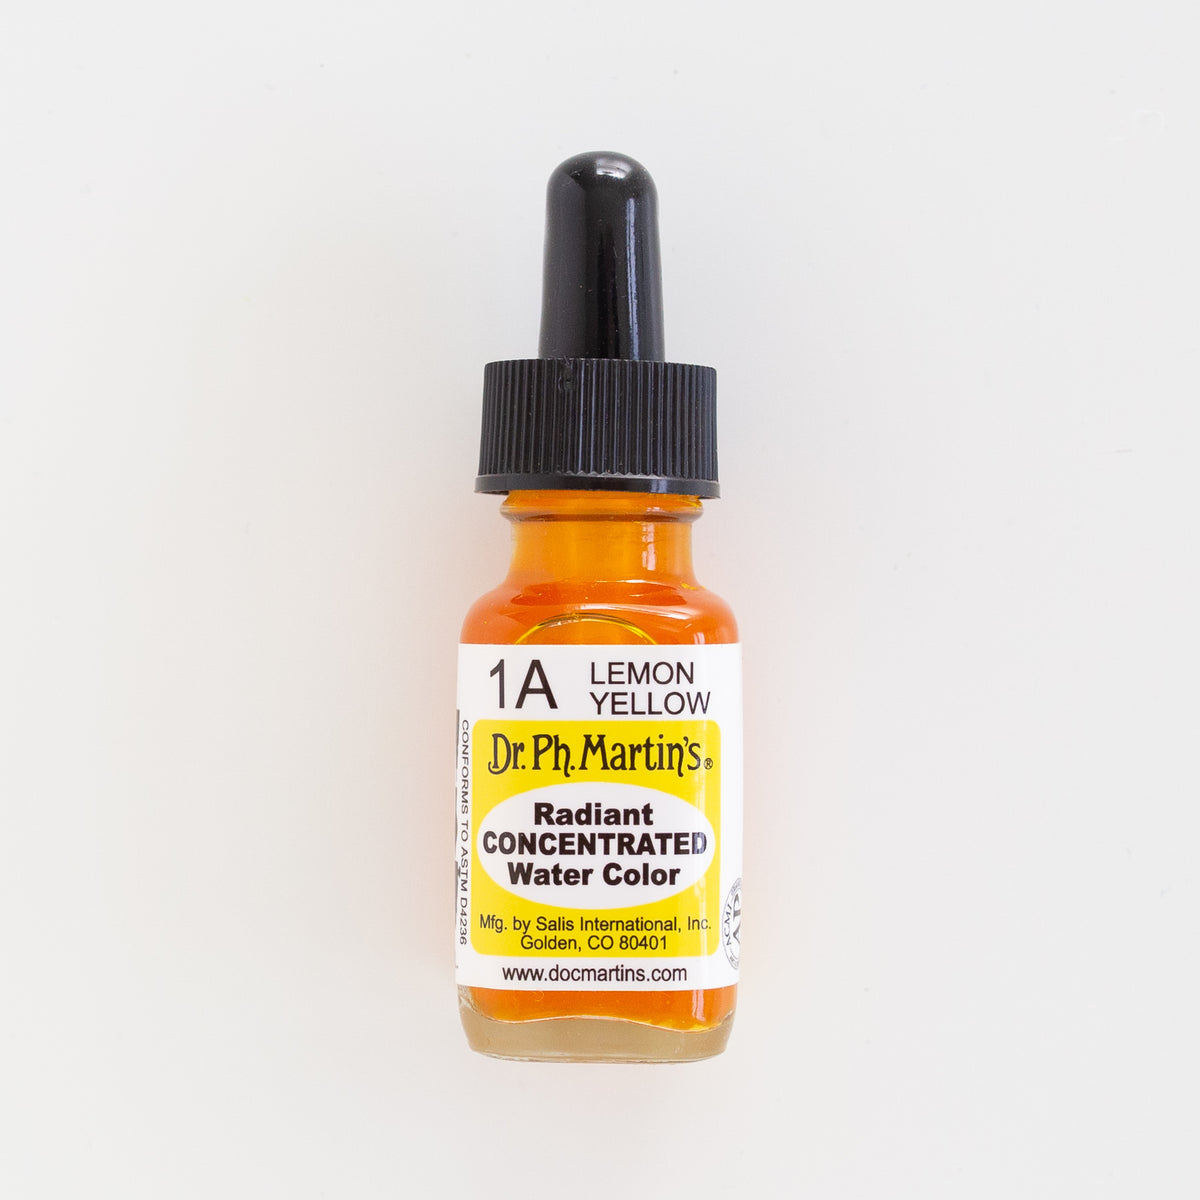 DR. Ph. Martin's Radiant Concentrated 1A Zitronengelb